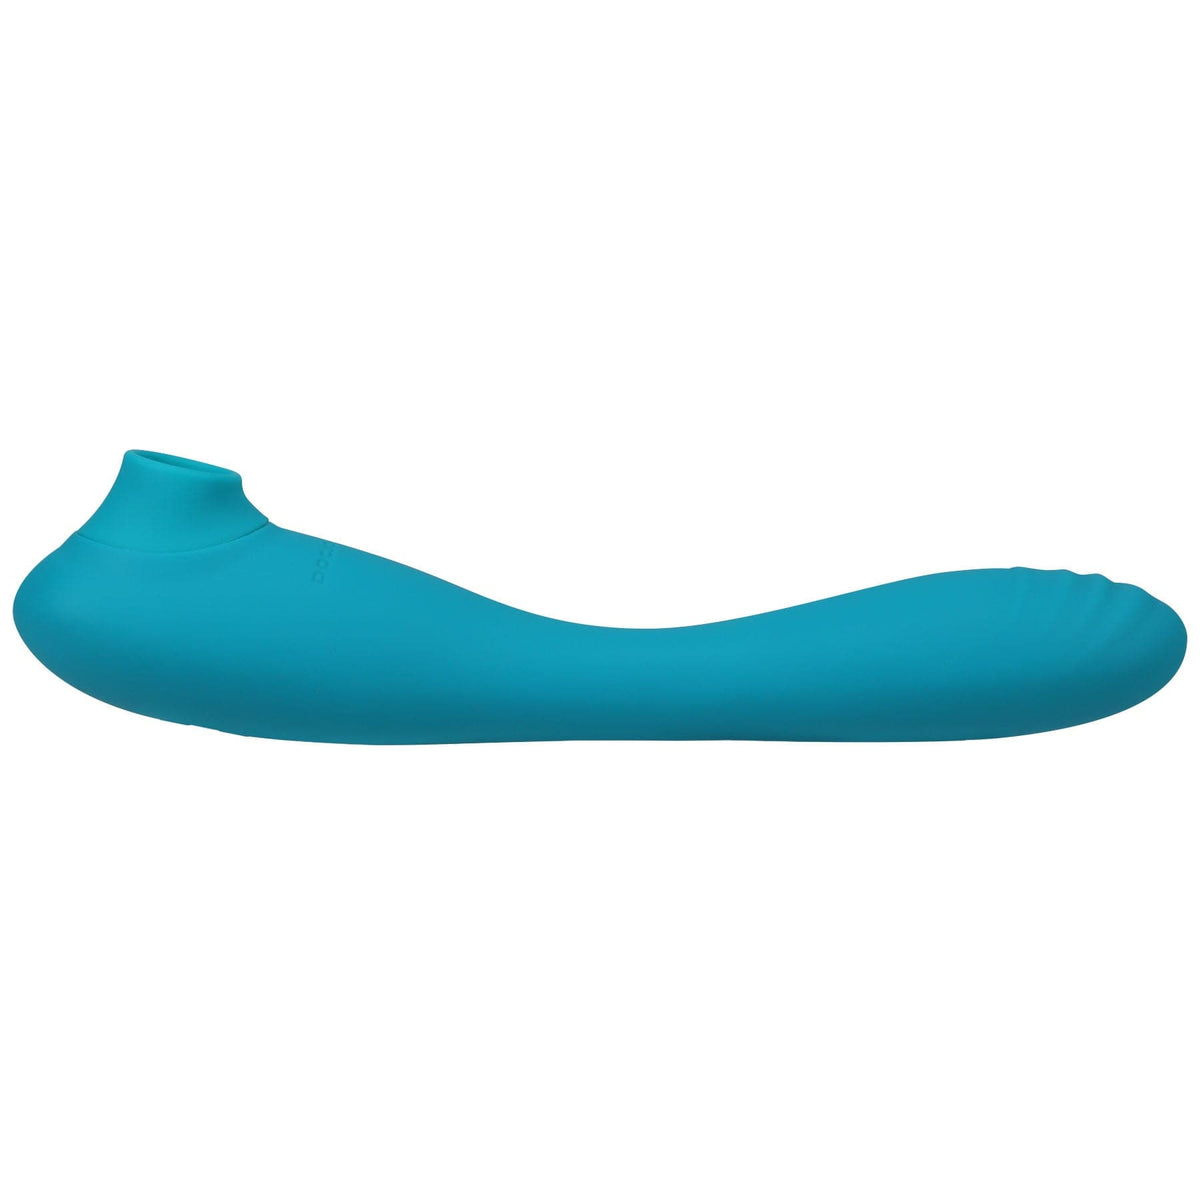 this product sucks sucking clitoral stimulator with bendable g spot vibrator teal